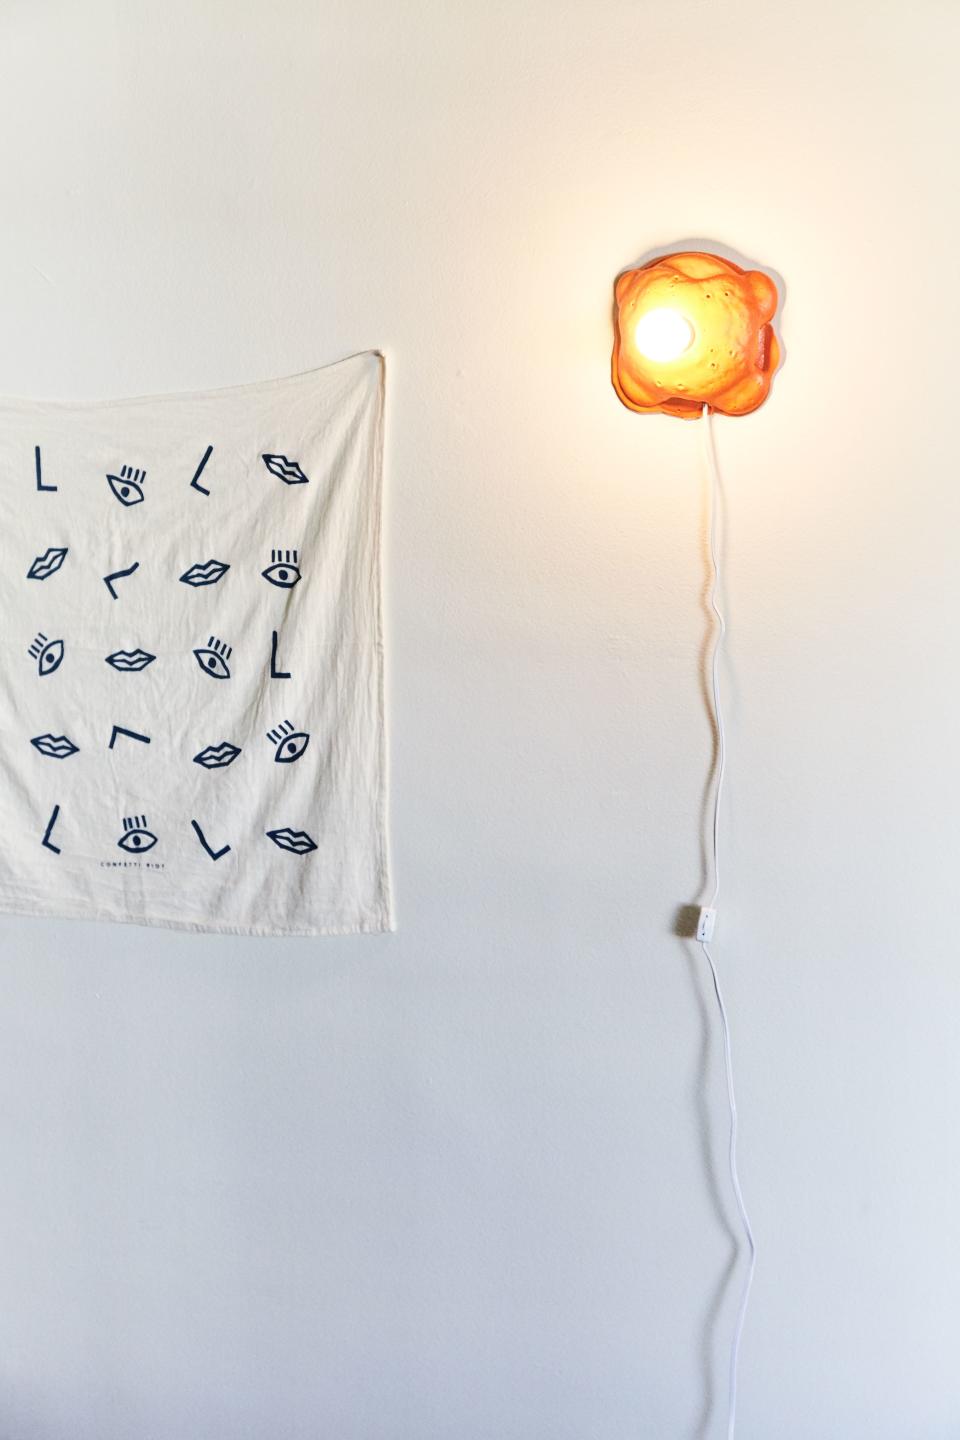 This tapestry is actually a tea towel Leah bought on Etsy years ago, and next to it is Joseph Algieri’s sconce for Clever x Urban Outfitters. “I snatched that up the day it went on sale. I'm obsessed with his work,” she says of the sconce.